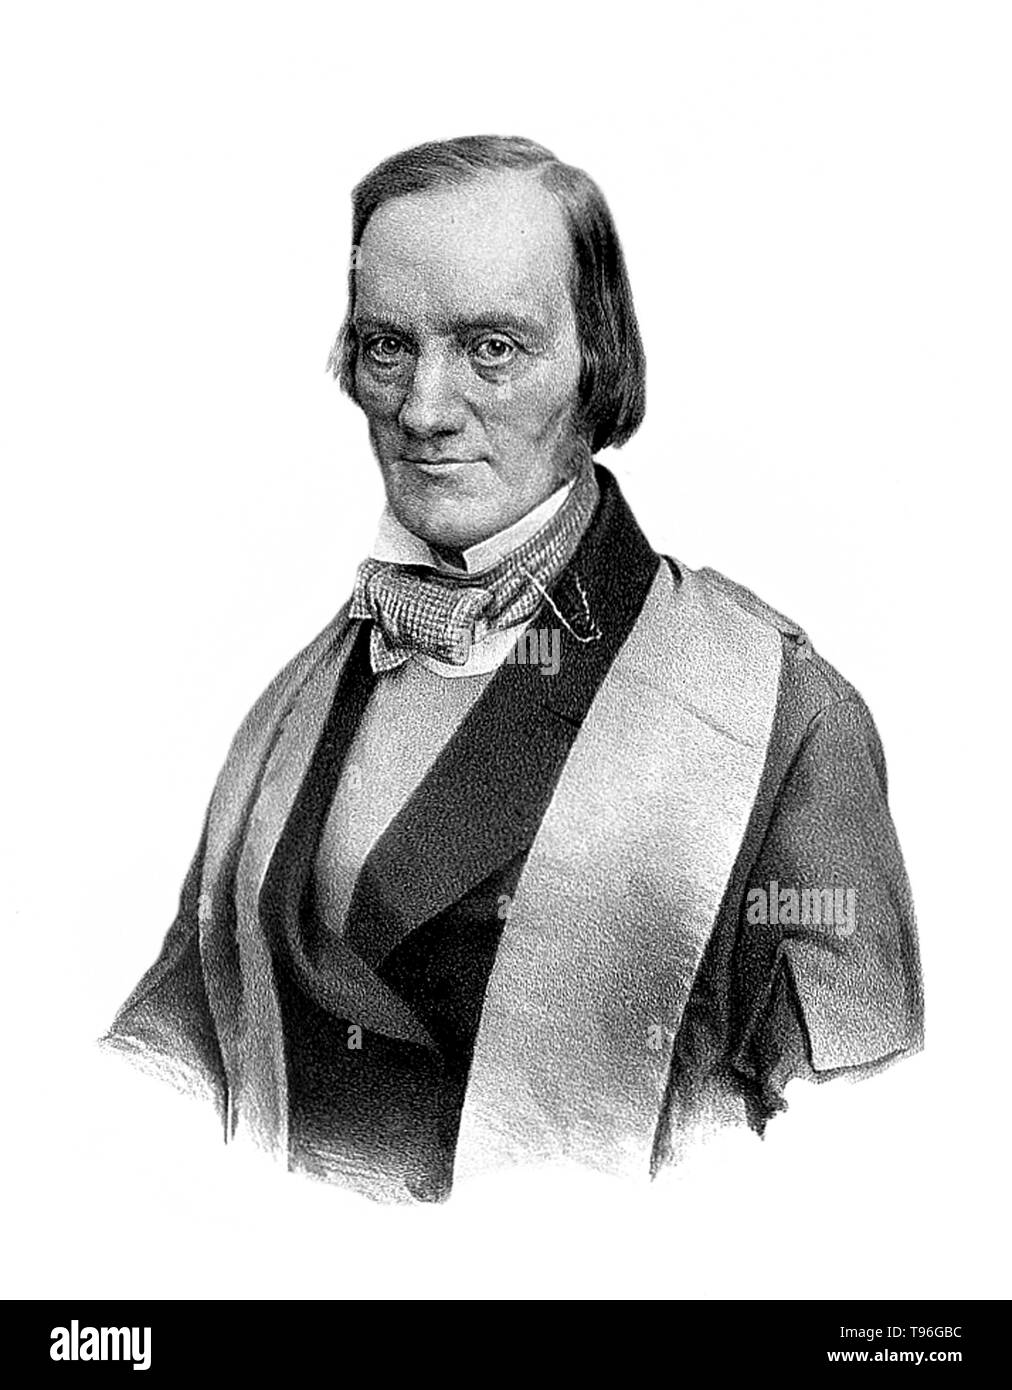 Richard Owen (July 20, 1804 - December 18, 1892) was an English biologist, comparative anatomist and paleontologist. One of his positions was that of prosector for the London Zoo, which meant that he had to dissect and preserve any zoo animals that died in captivity. This gave him vast experience with the anatomy of exotic animals. He produced a vast array of scientific work, but is probably best remembered today for coining the word Dinosauria. Stock Photo